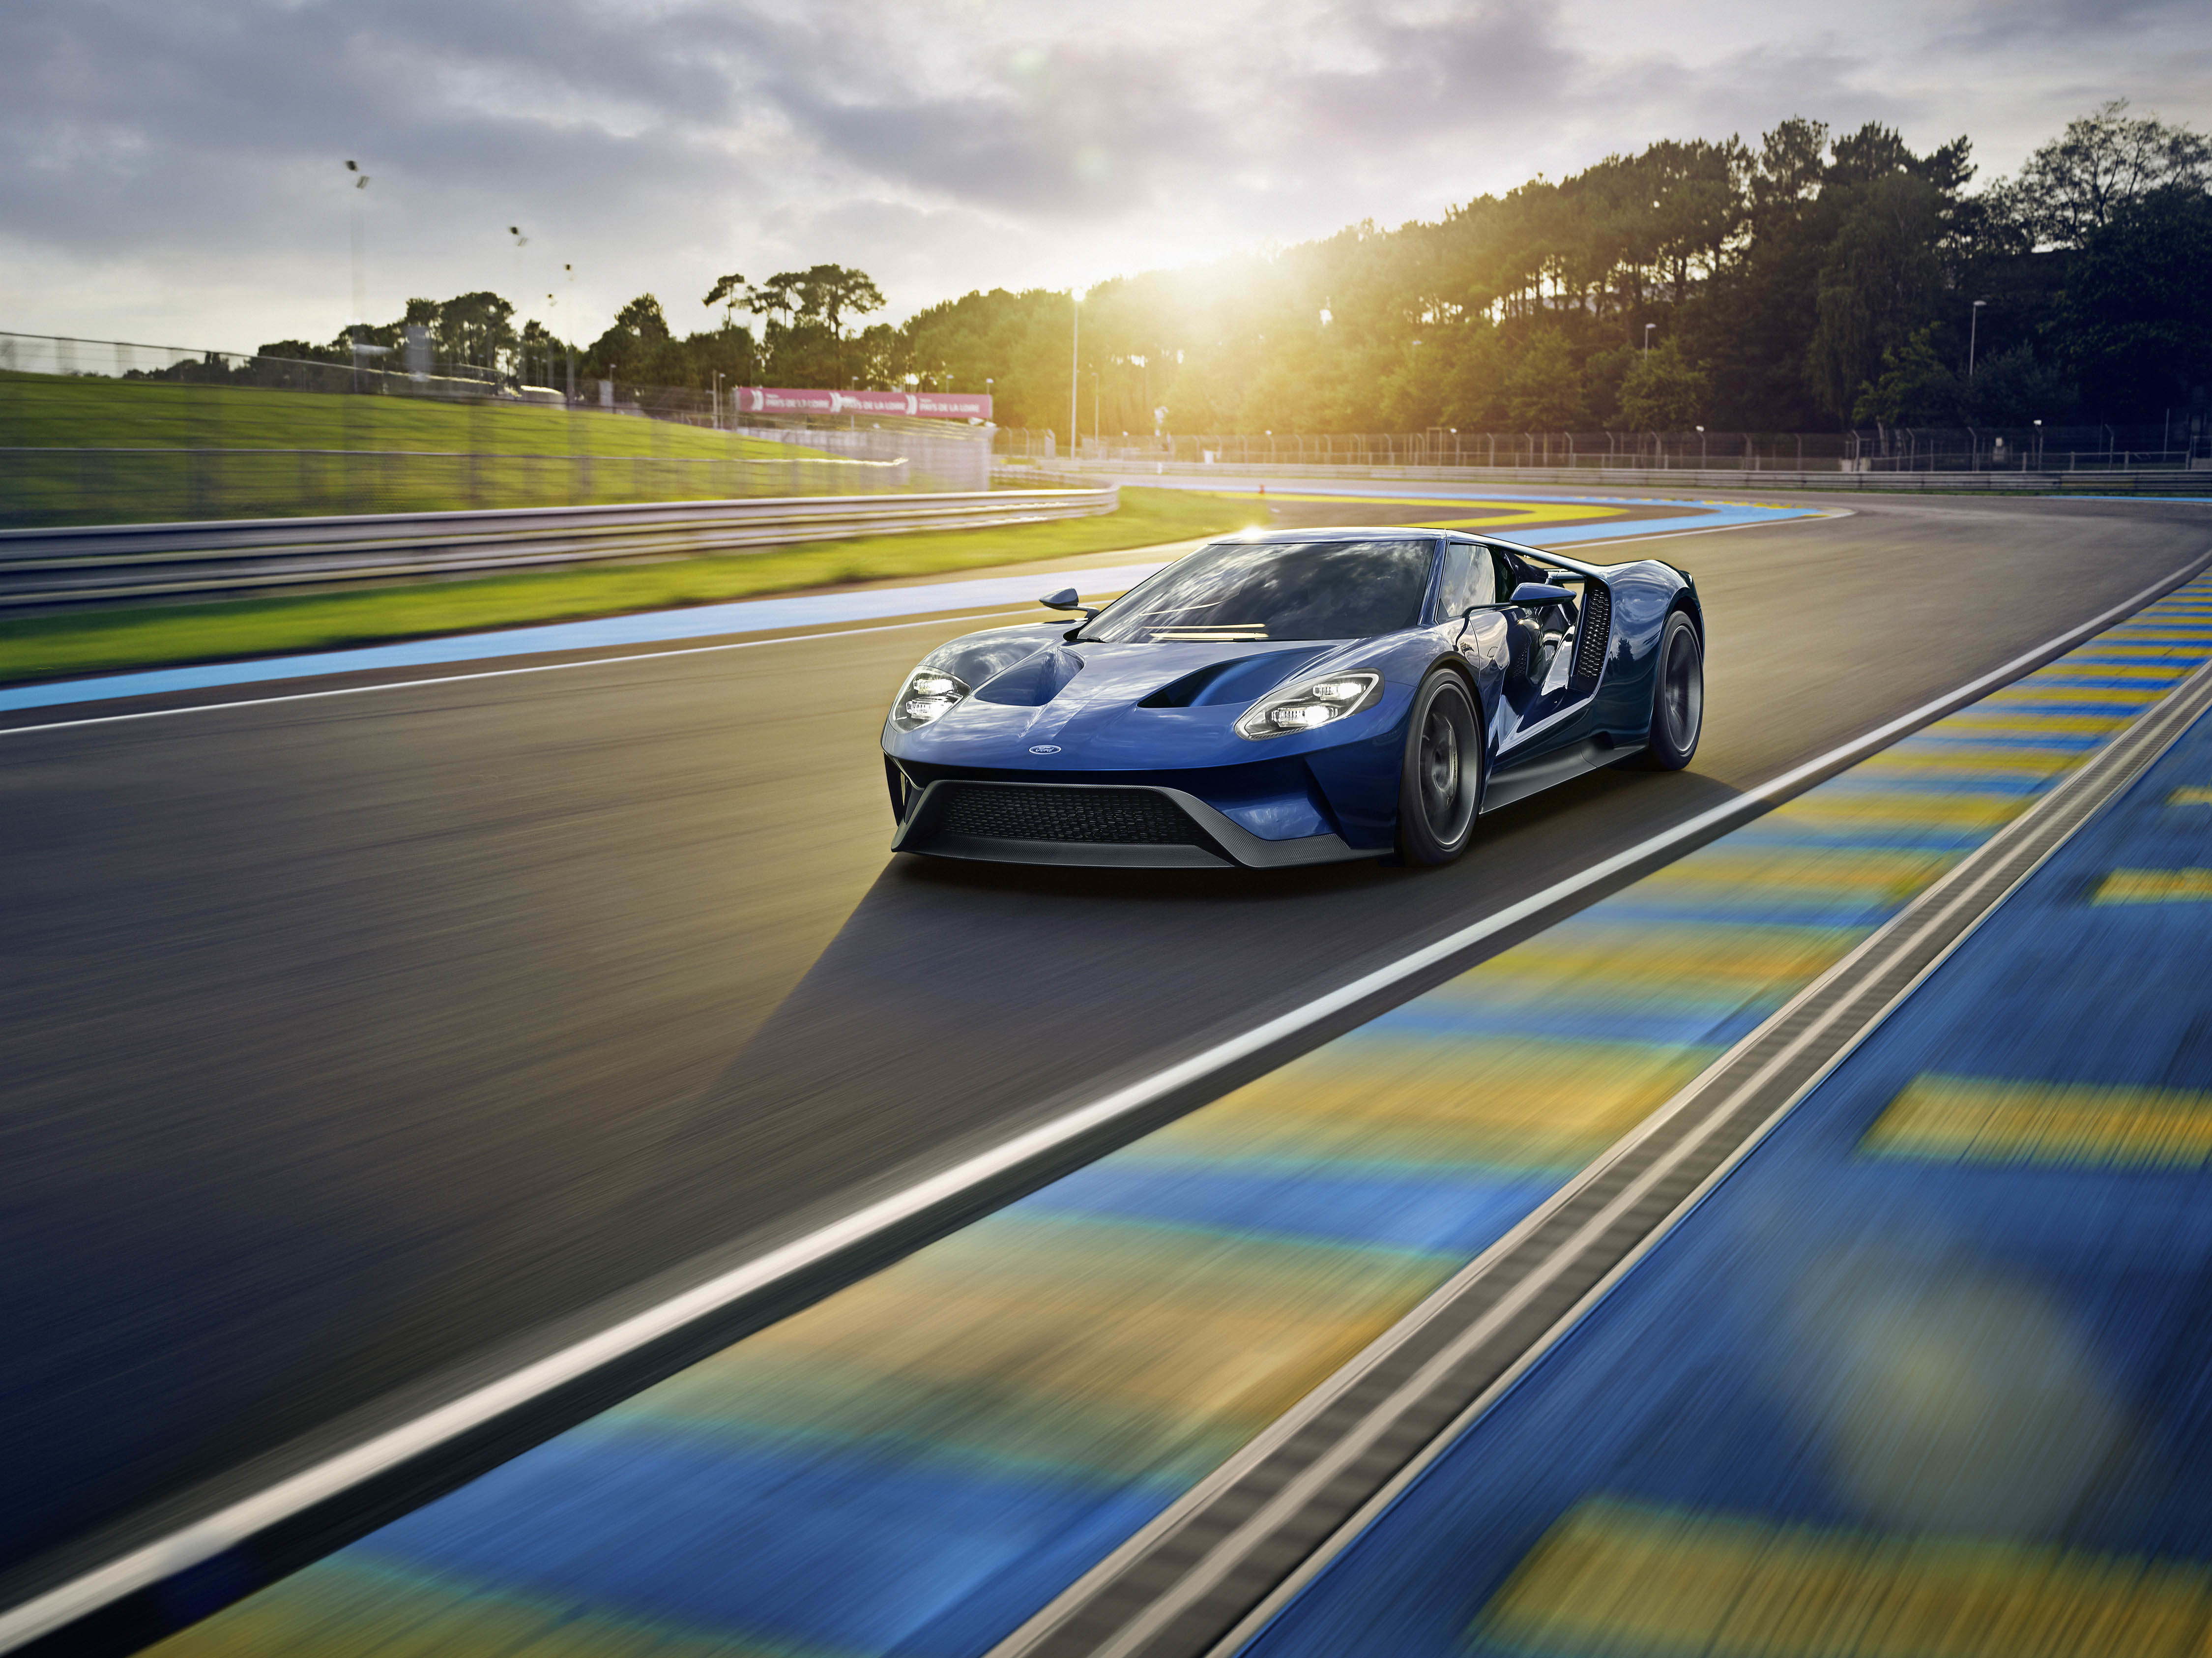 Lock Screen PC Wallpaper sports, ford, cars, sports car, gt, track, route